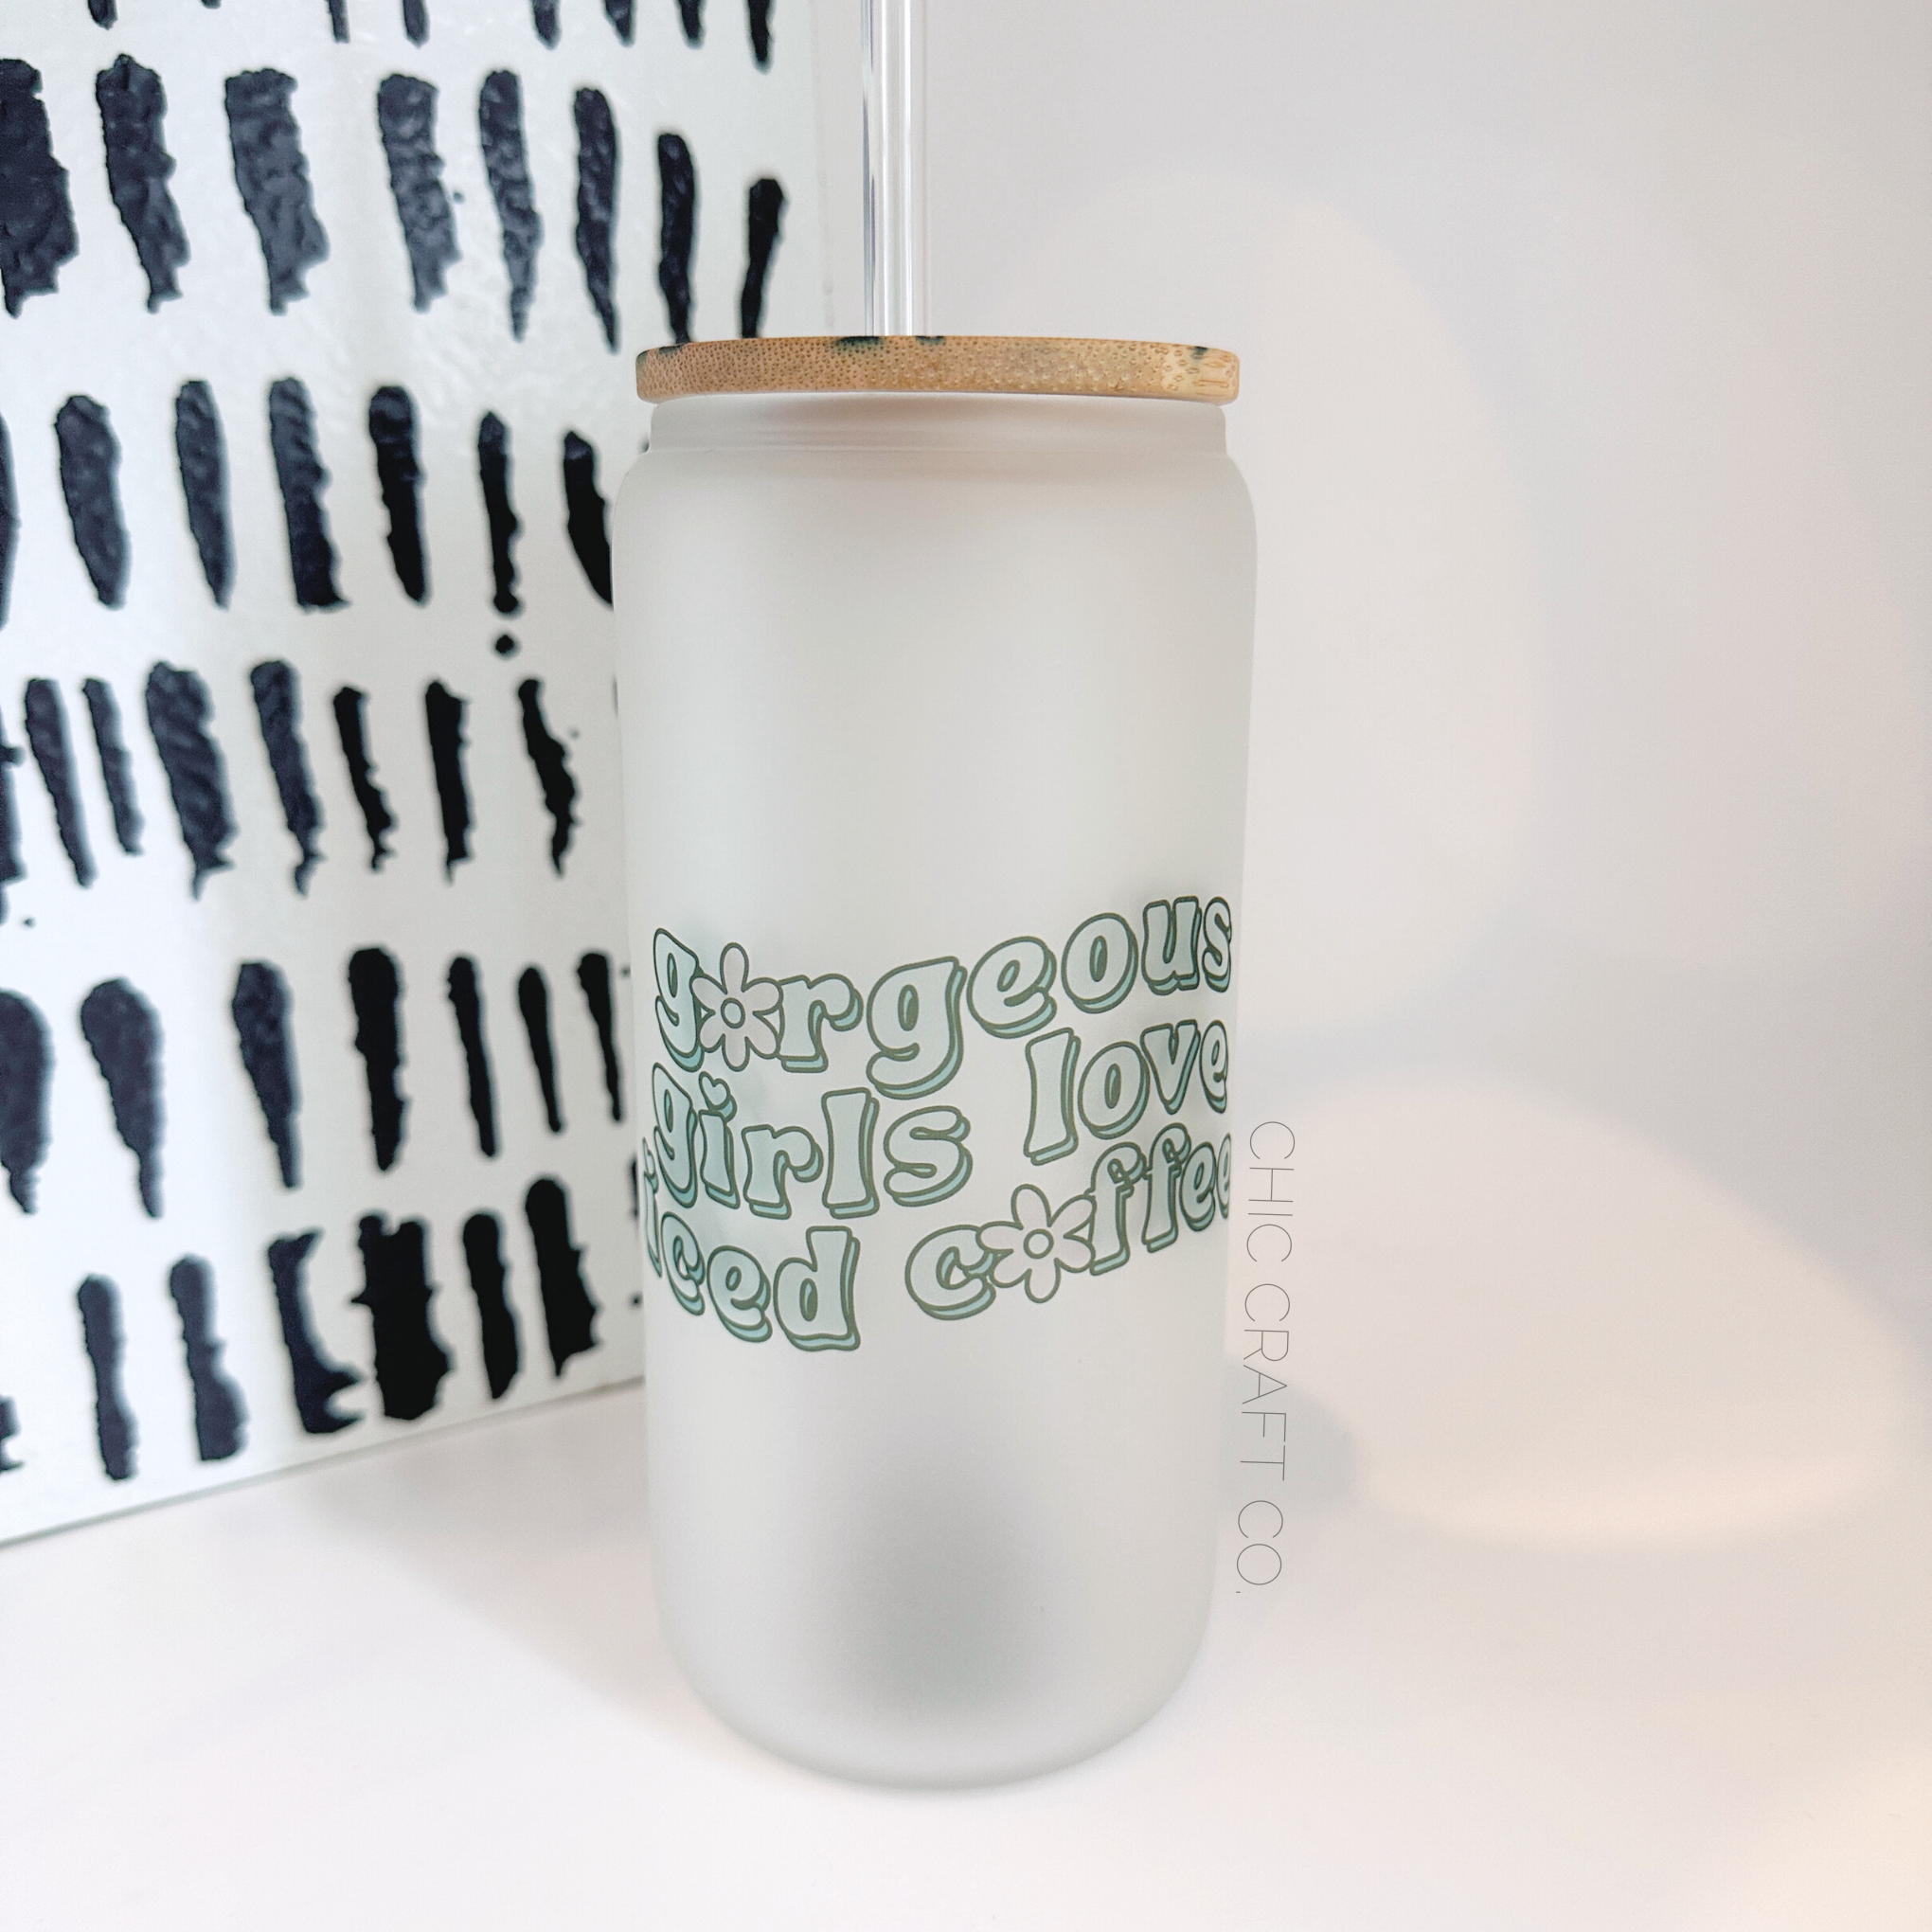 Gorgeous Girls Love Iced Coffee Frosted Glass Tumbler